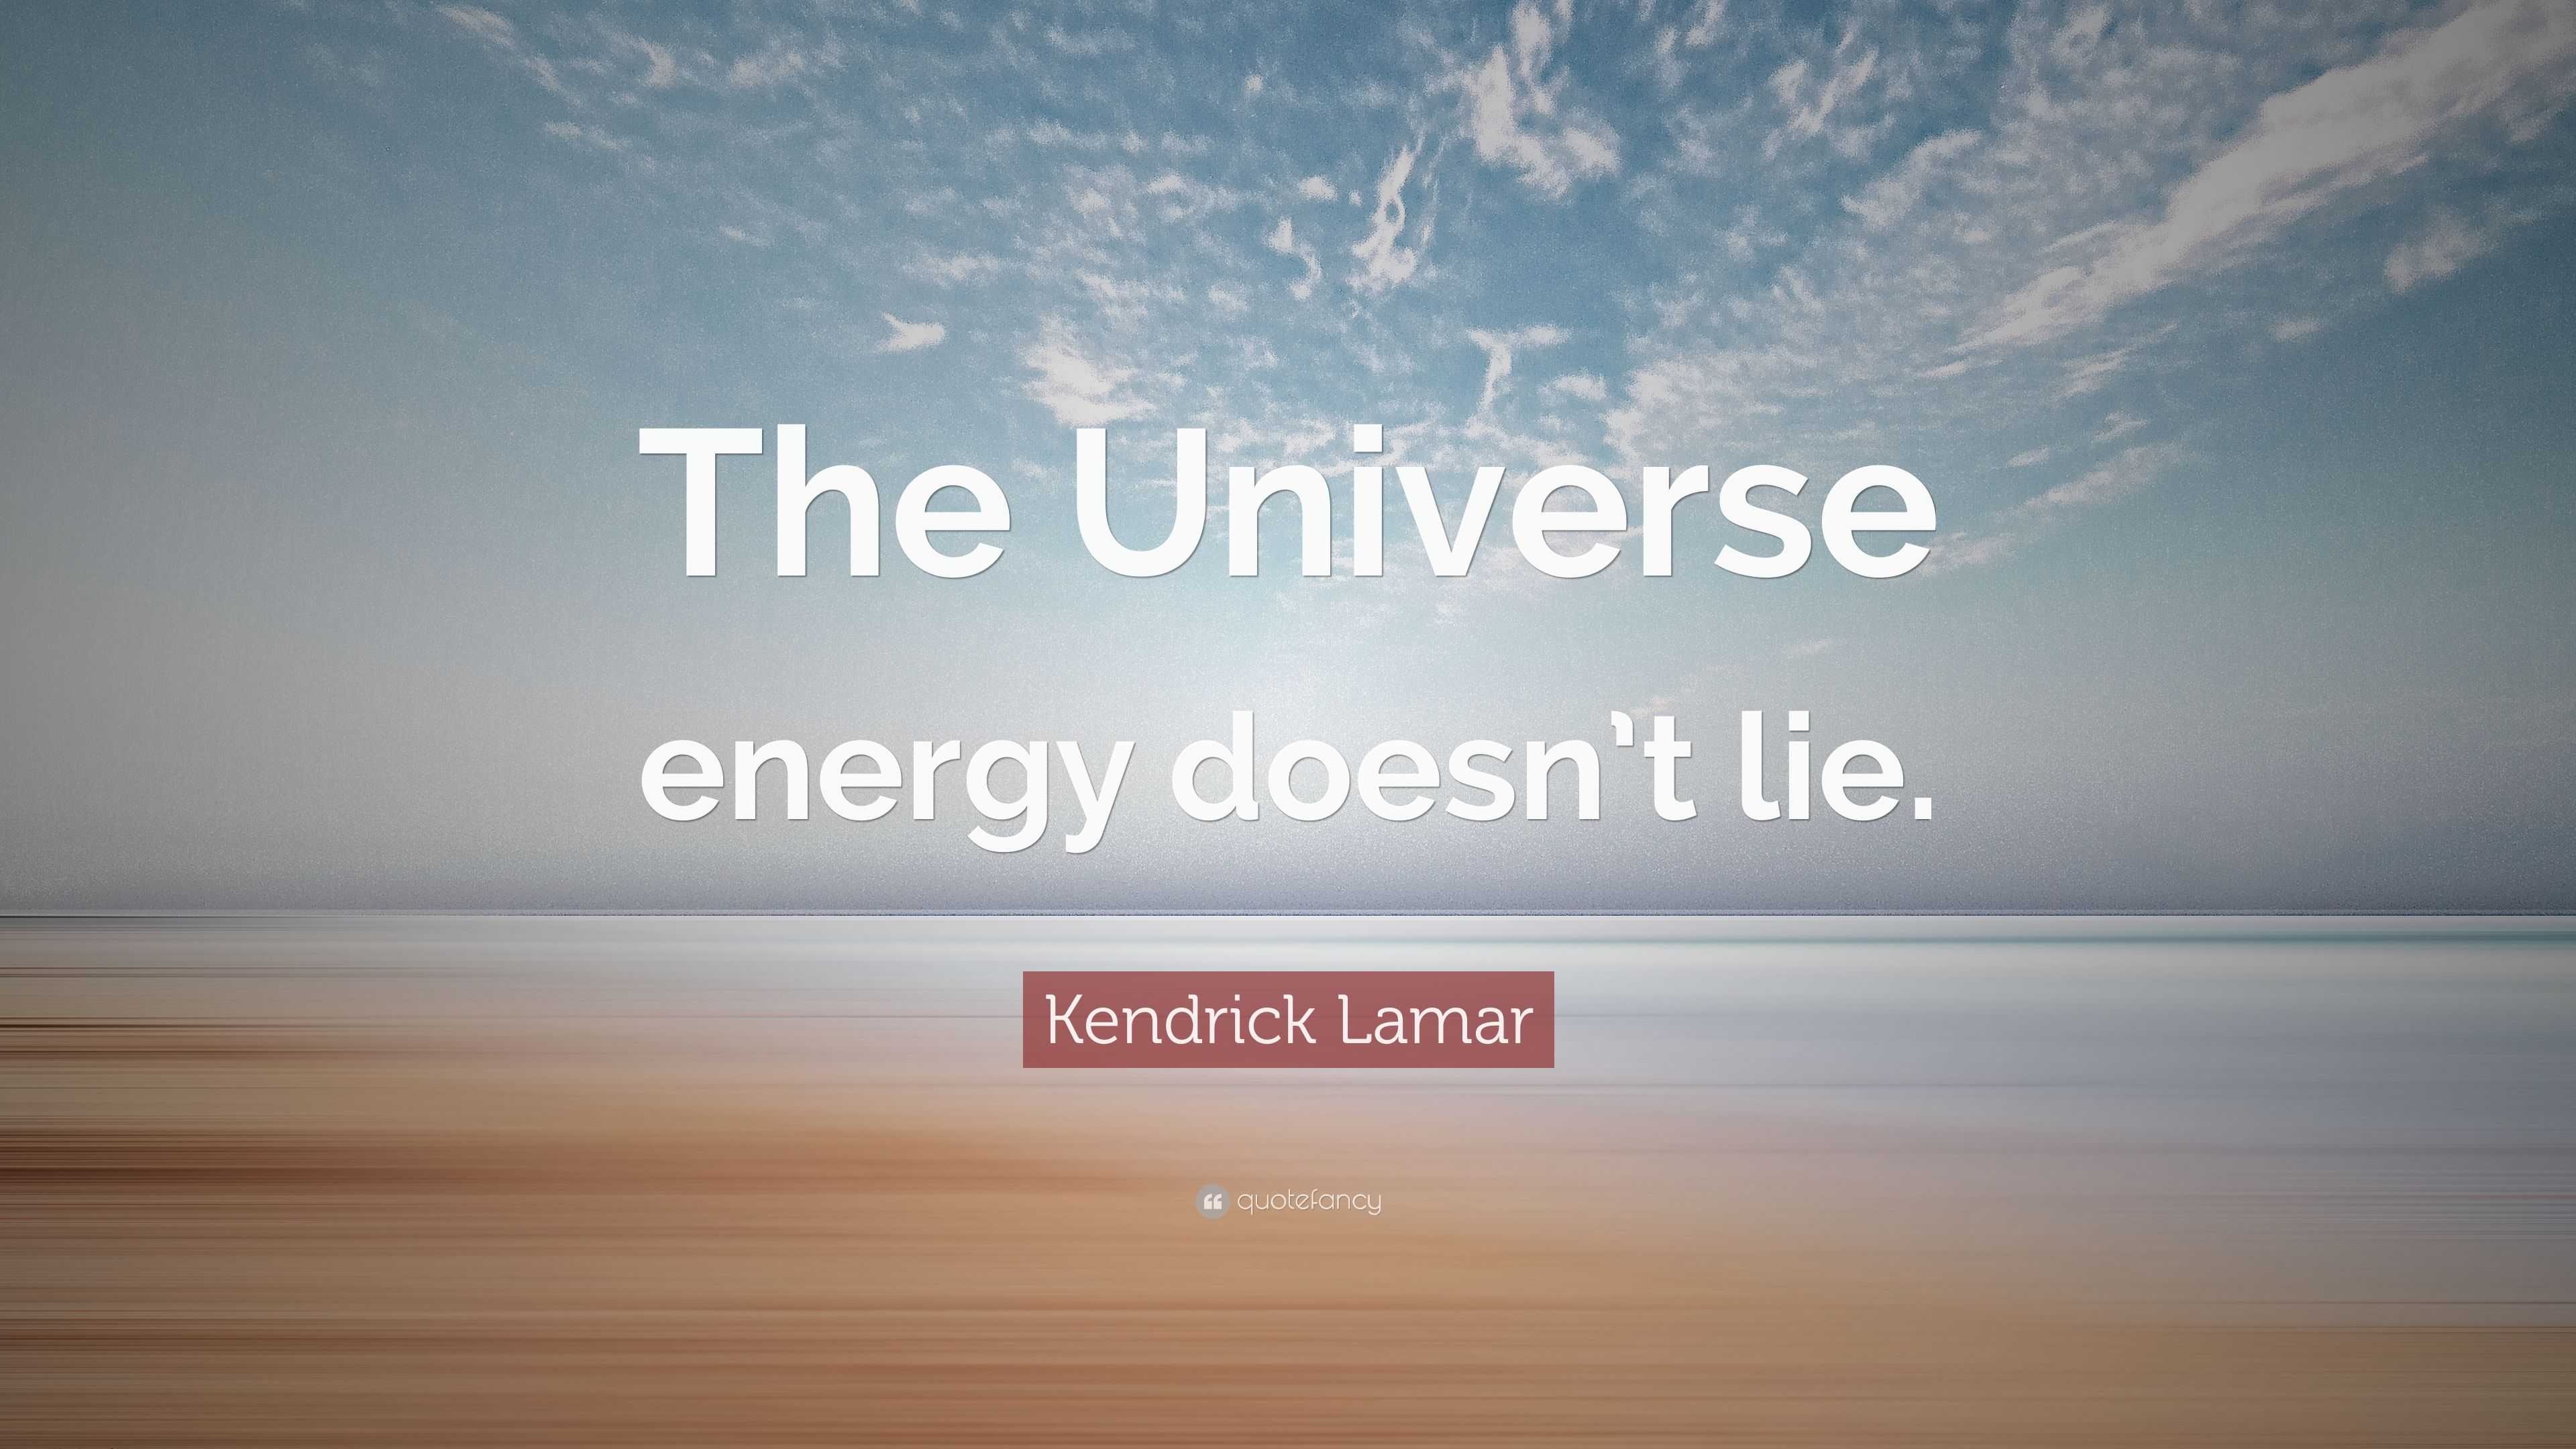 Kendrick Lamar Quote “The Universe energy doesn’t lie.”